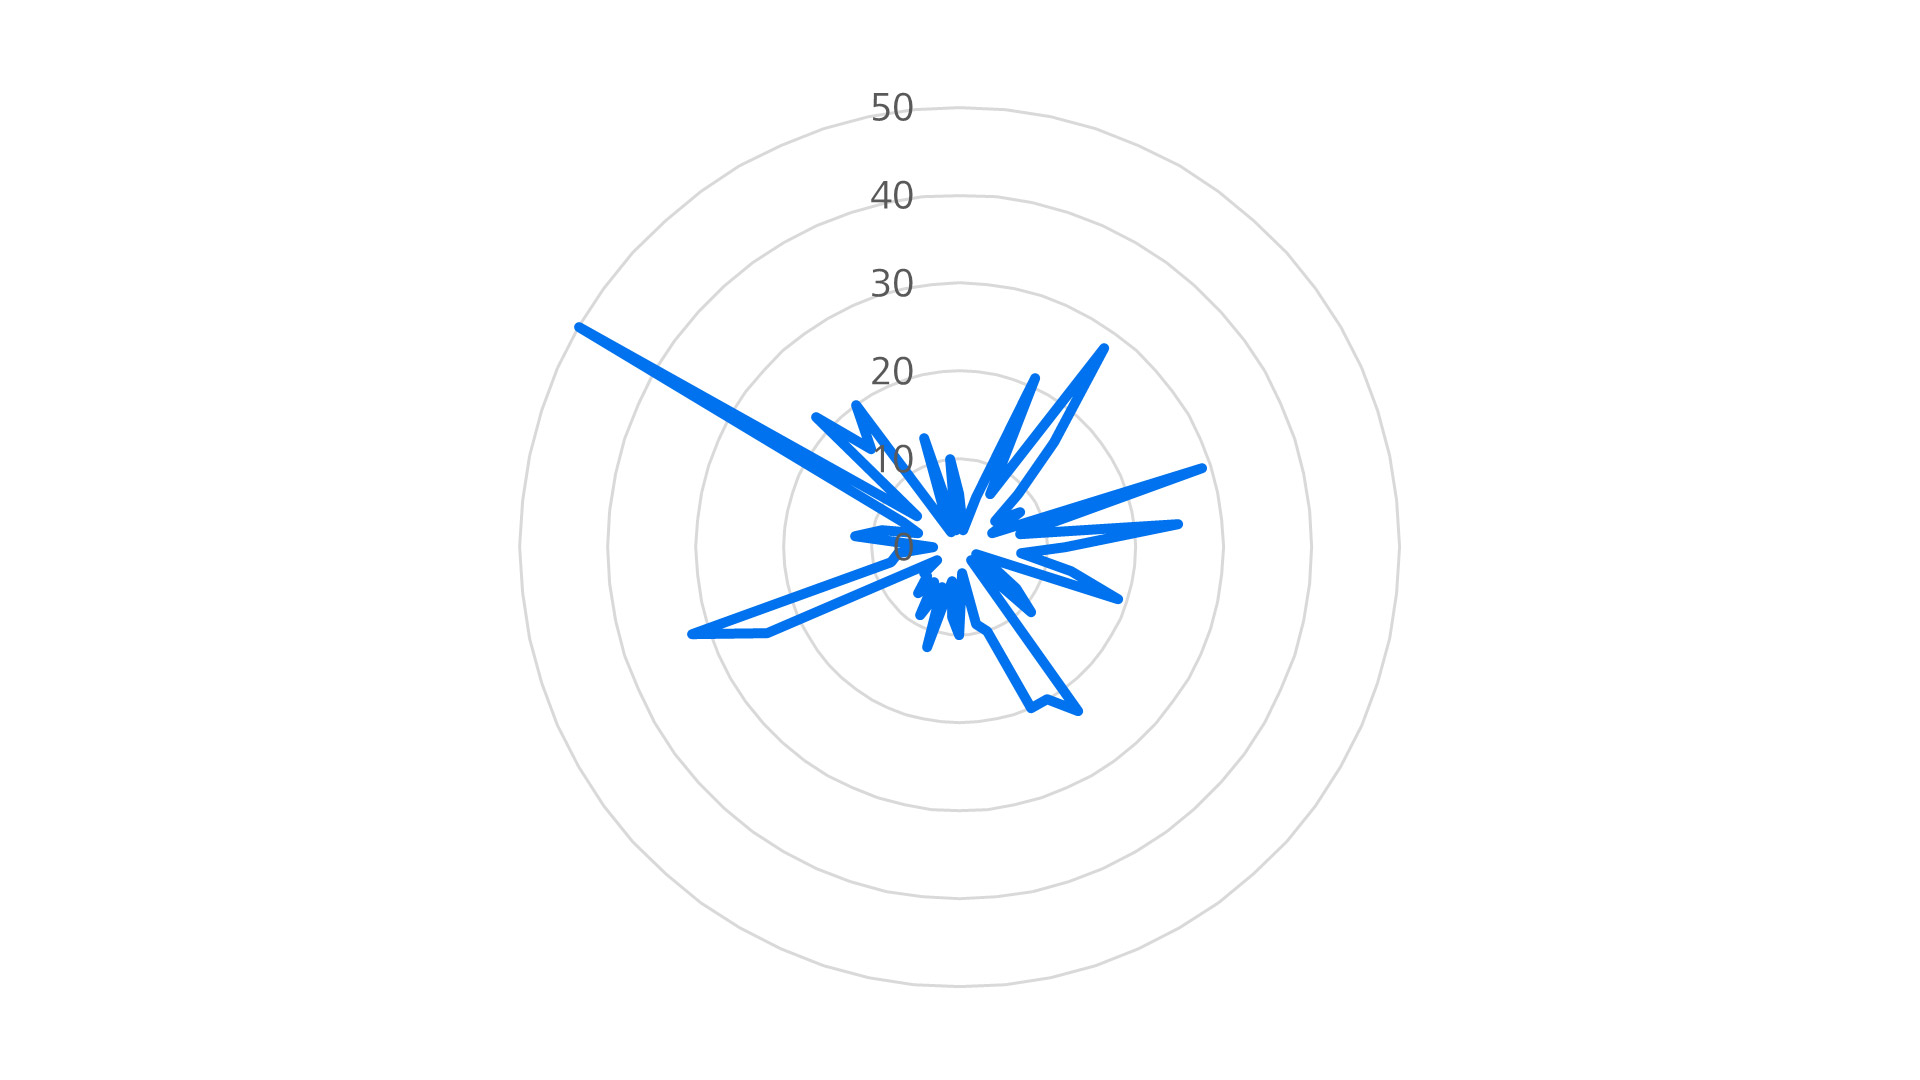 Radar chart illustrating the number of Neurites per neuron traced